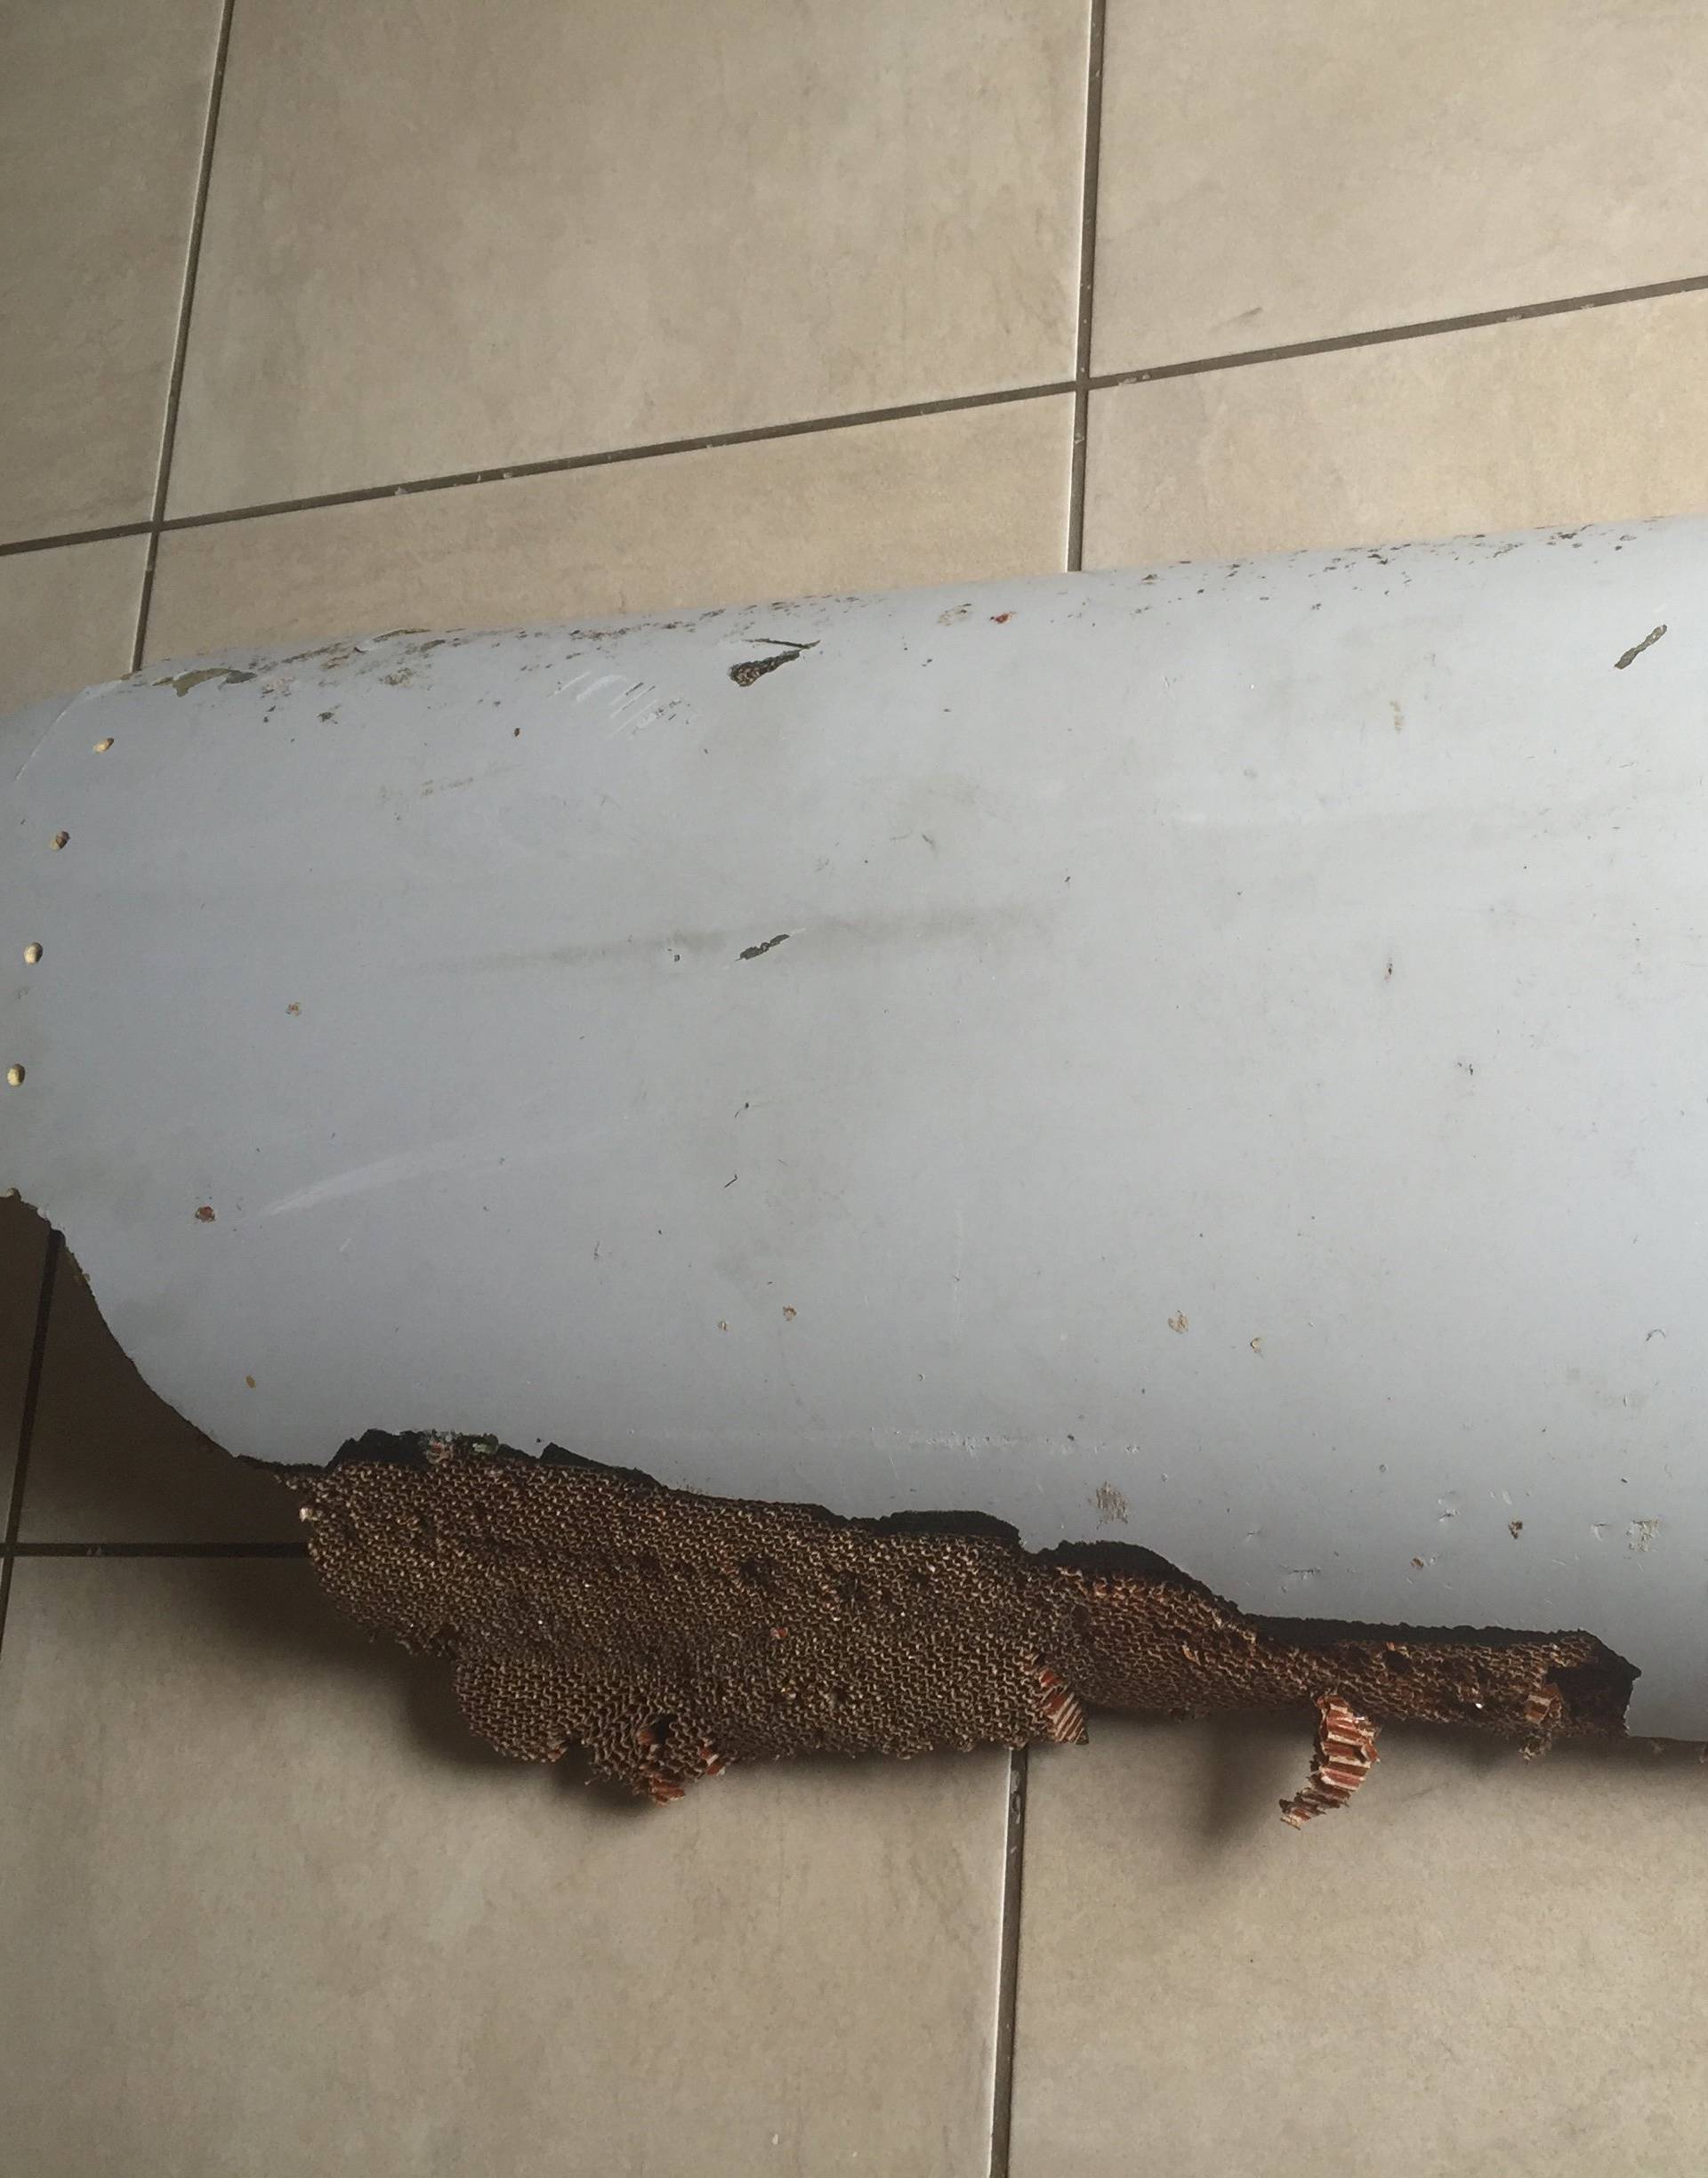 Handout photo of piece of debris found by a South African family off the Mozambique coast, which authorities will examine to see if it is from missing Malaysia Airlines flight MH370